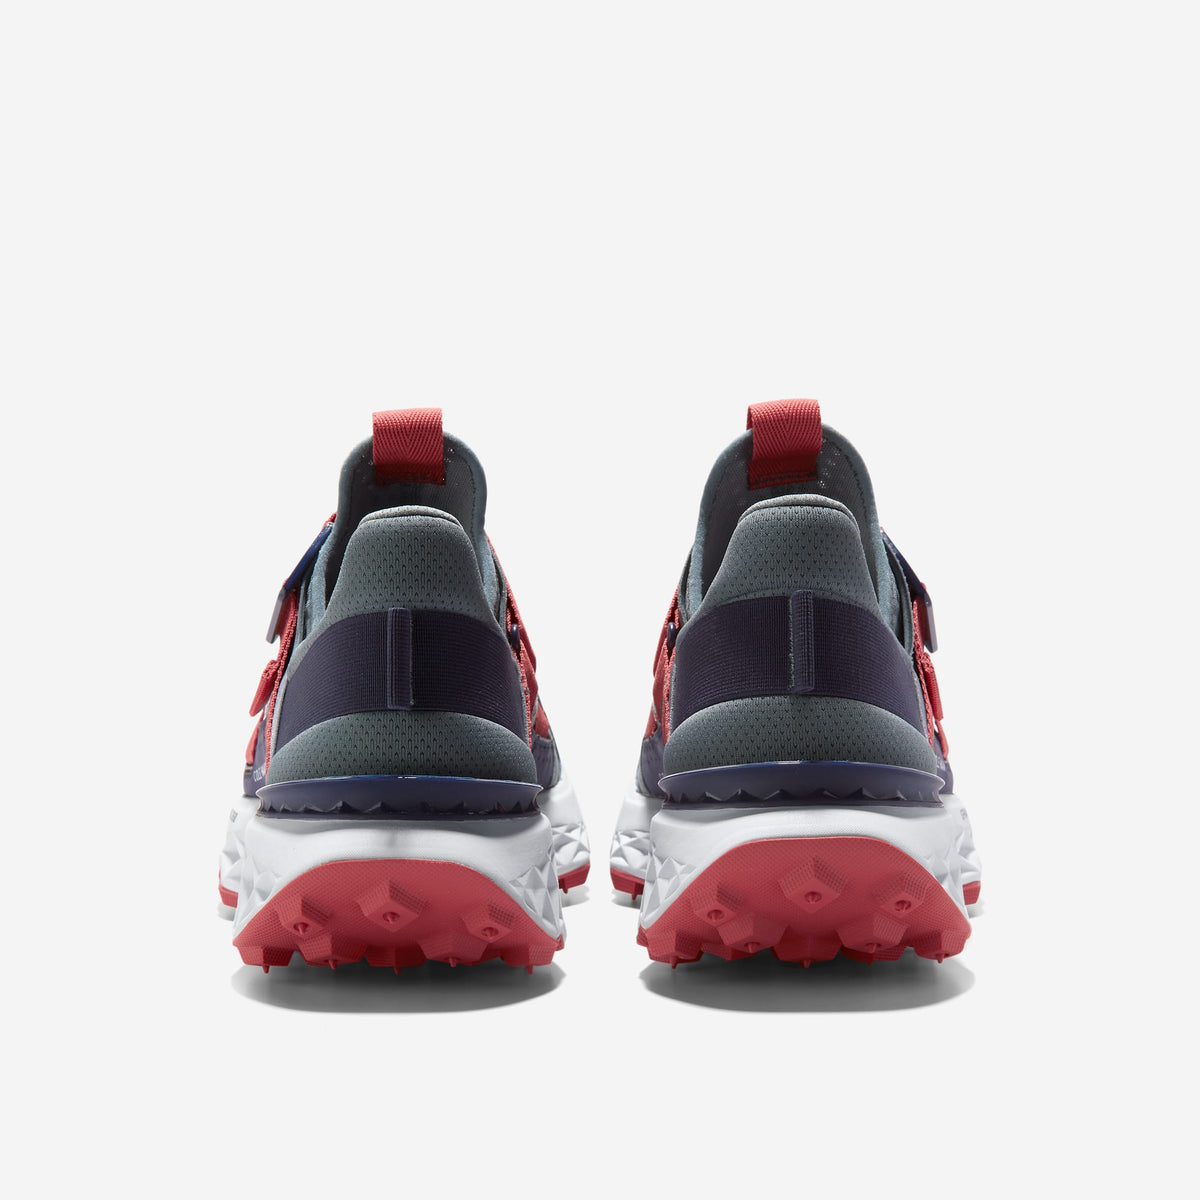 C37934:STORMY WEATHER / MINERAL RED / OPTIC WHITE